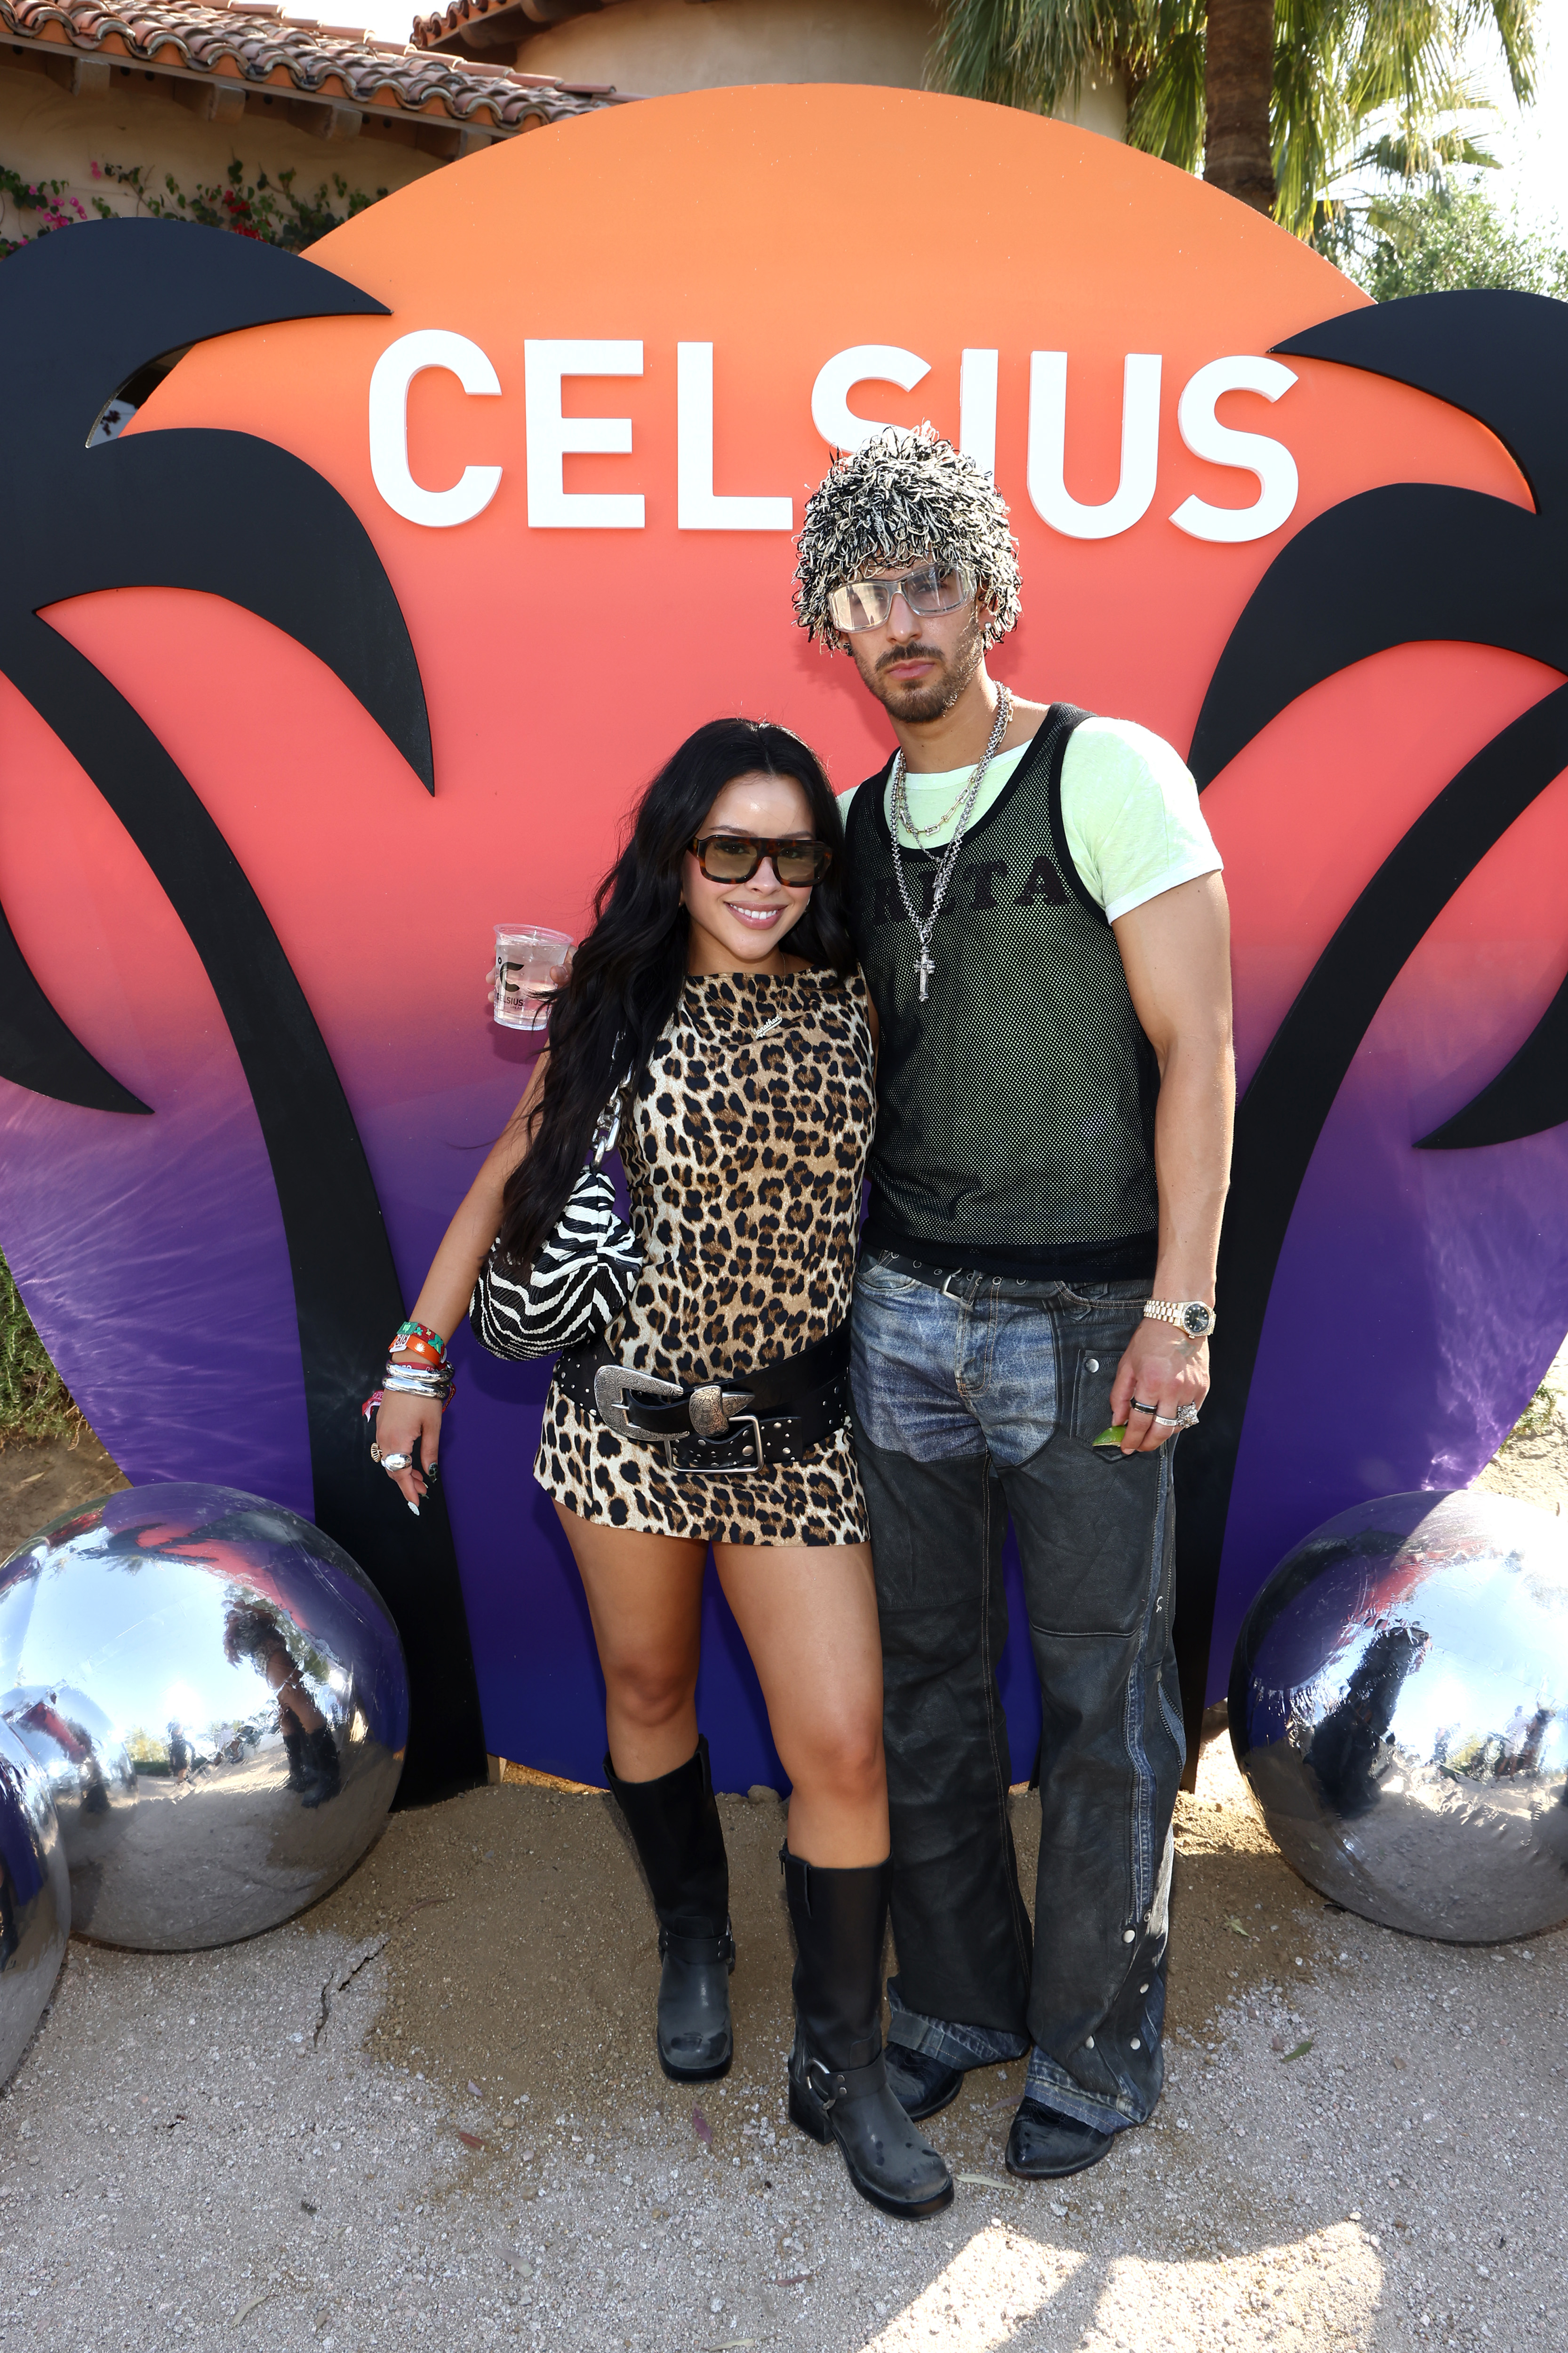 Two individuals standing before a Celsius logo, one in a leopard print outfit and boots, the other in a tank top and hat